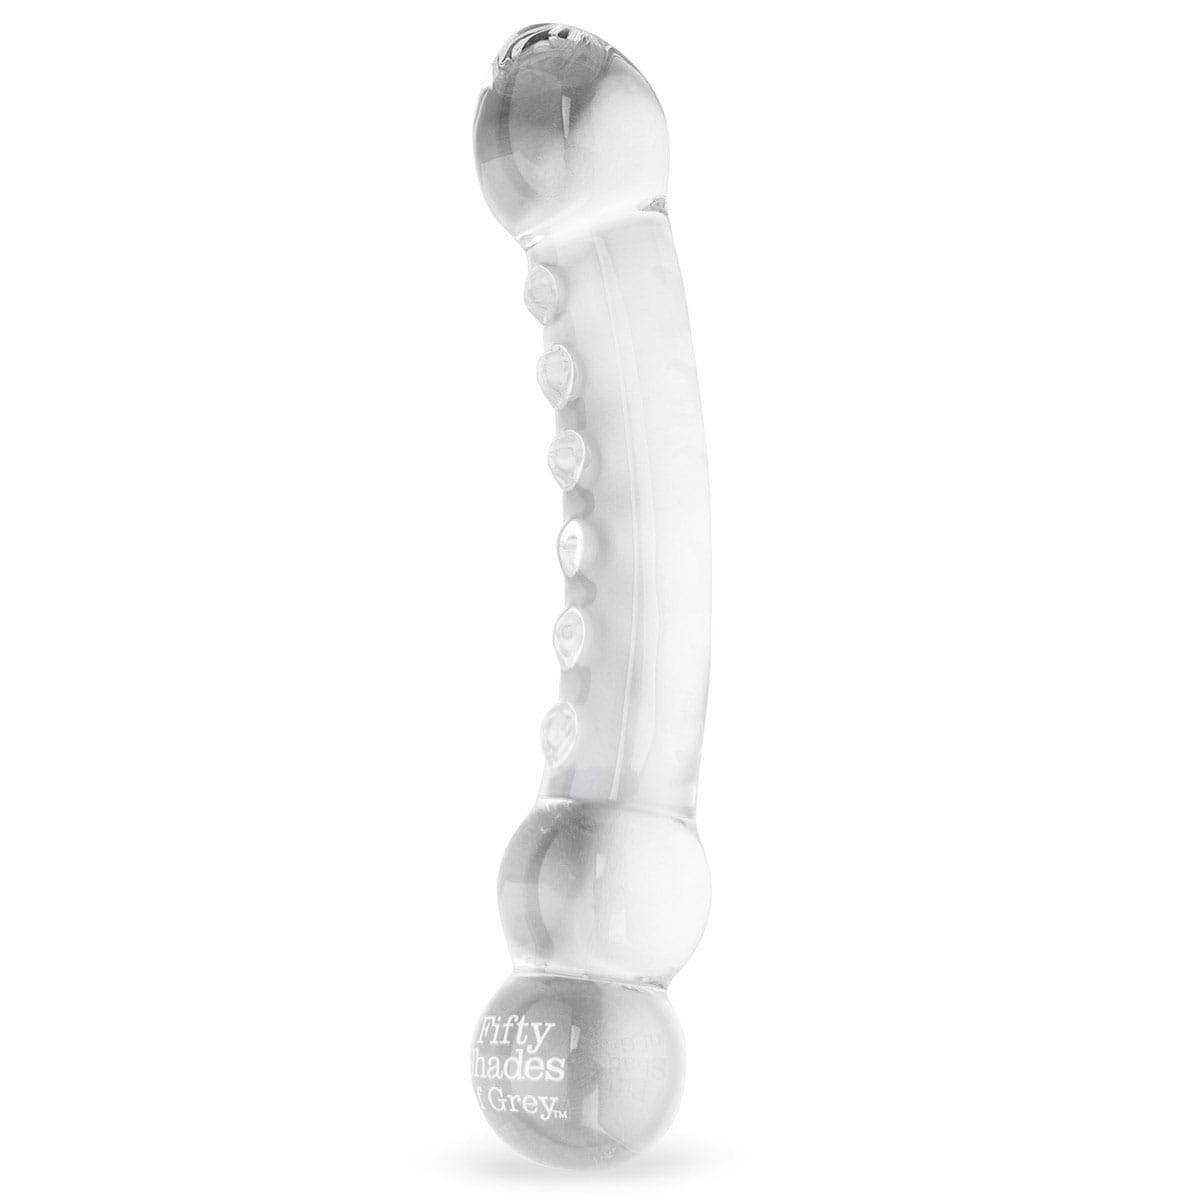 Buy Fifty Shades Drive Me Crazy Glass Massage Wand 7.5 long and 1.43 thick dildo made by Fifty Shades of Grey.